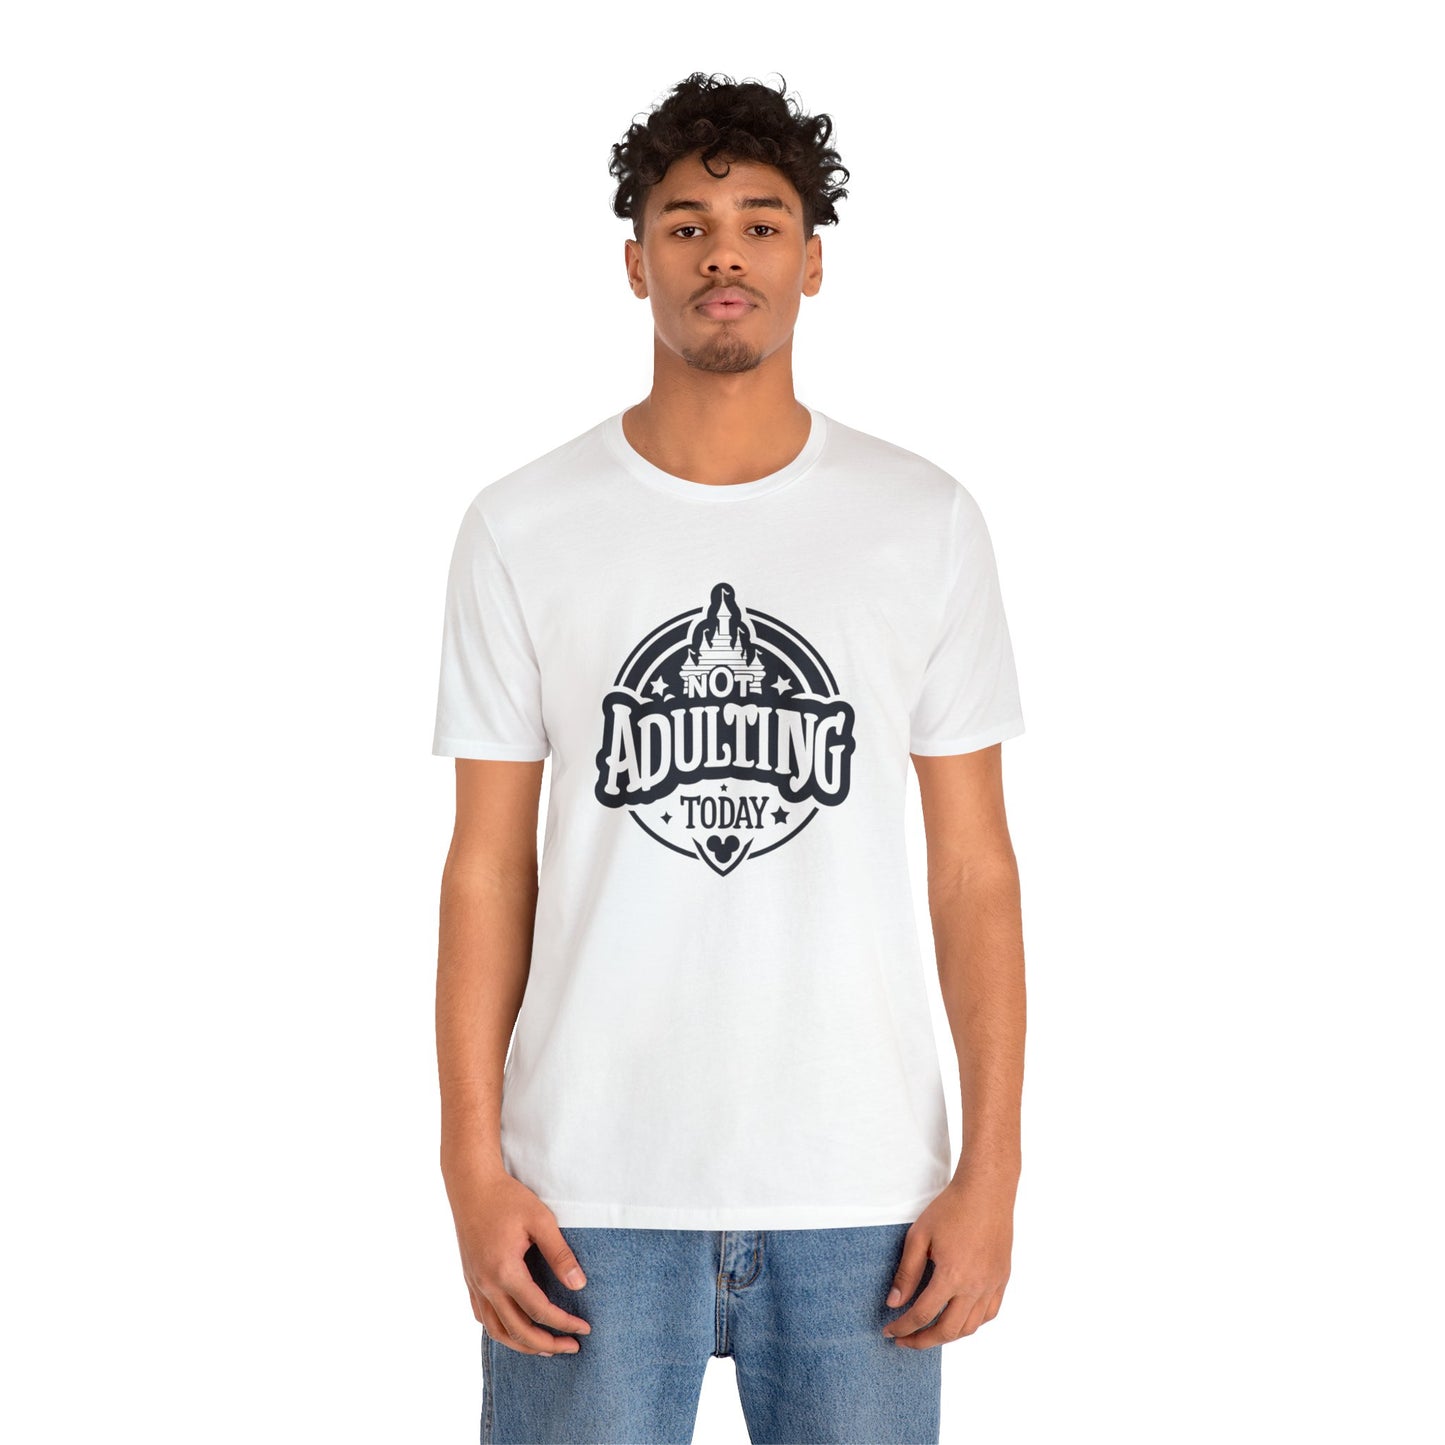 Not Adulting Today Short Sleeve Tee